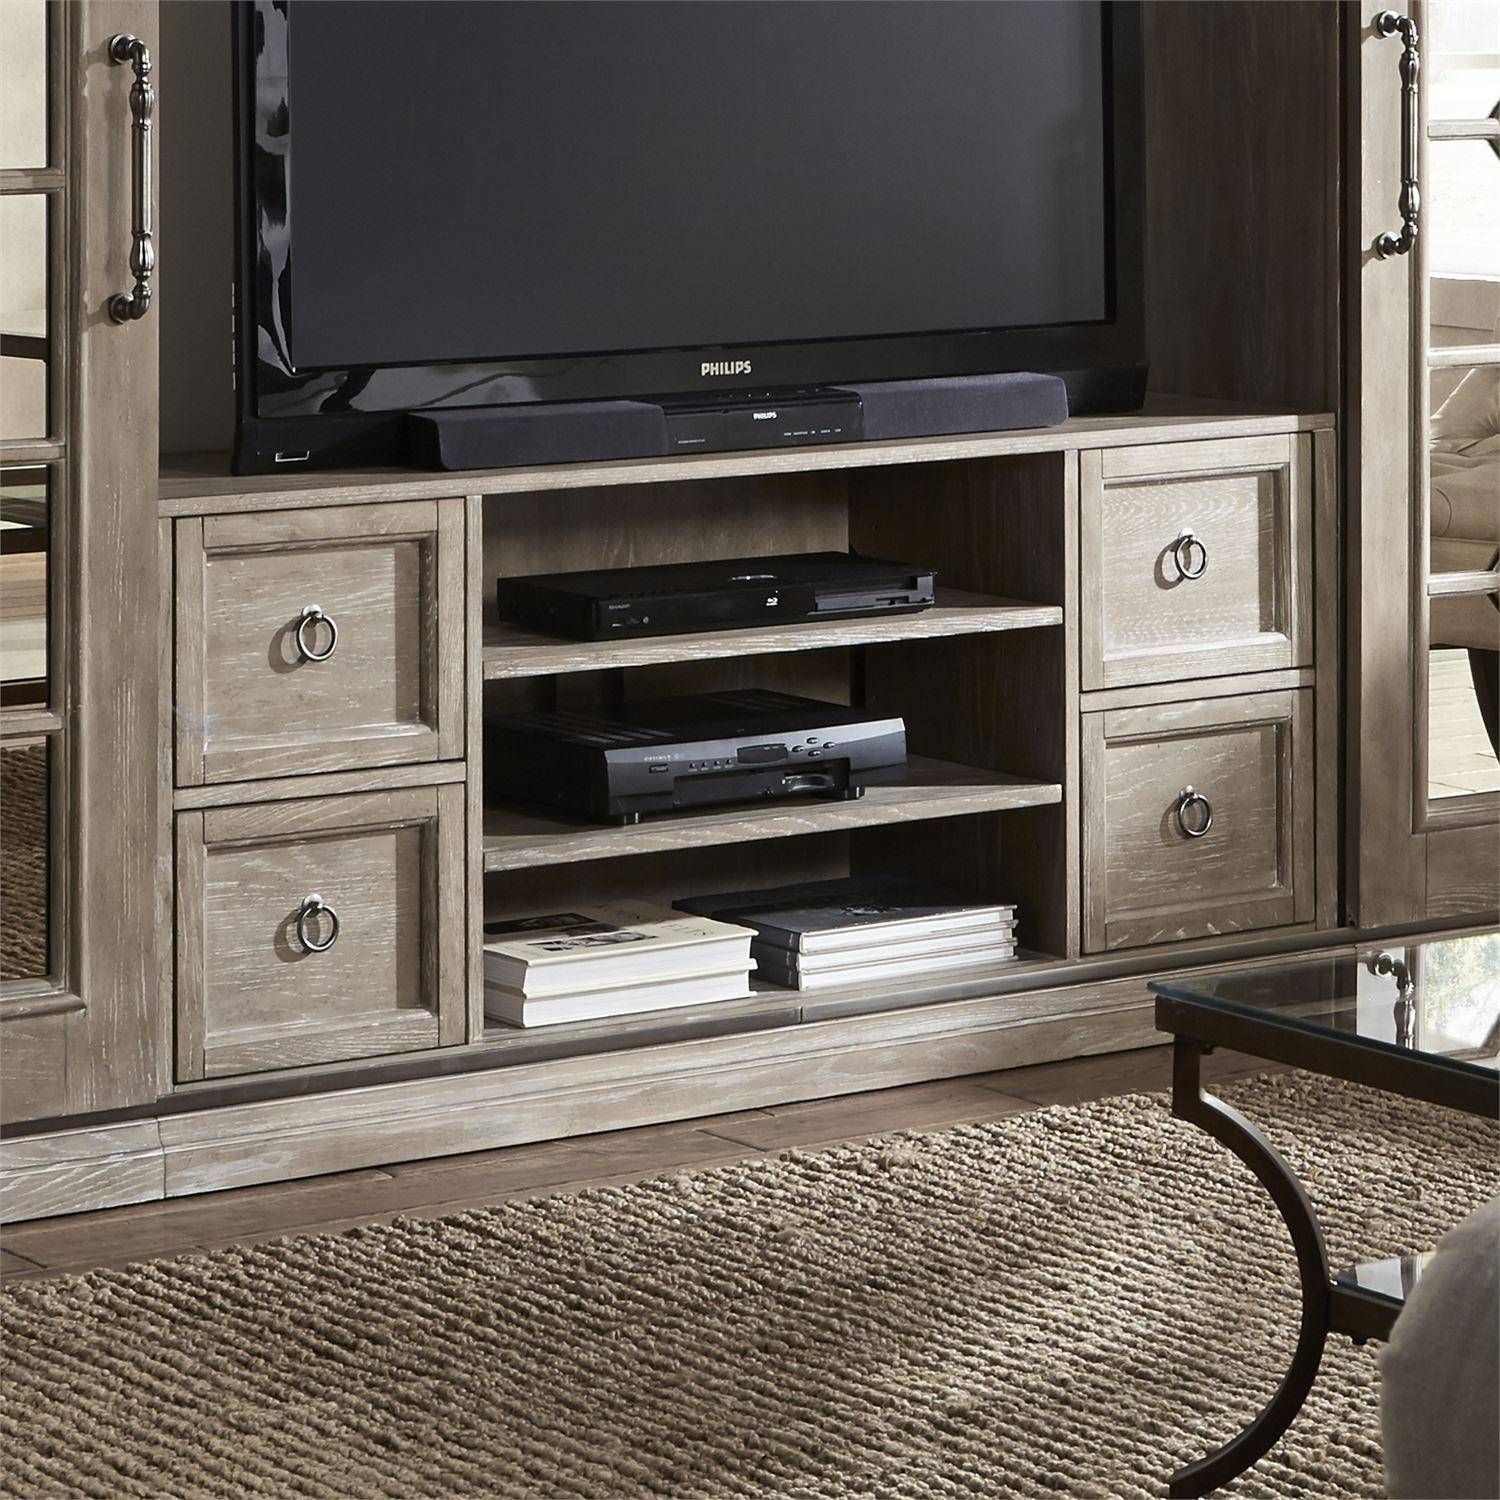 Beige Wood Tv Stand Mirrored Reflections (874 Entw Throughout Mirrored Tv Cabinets Furniture (View 1 of 15)